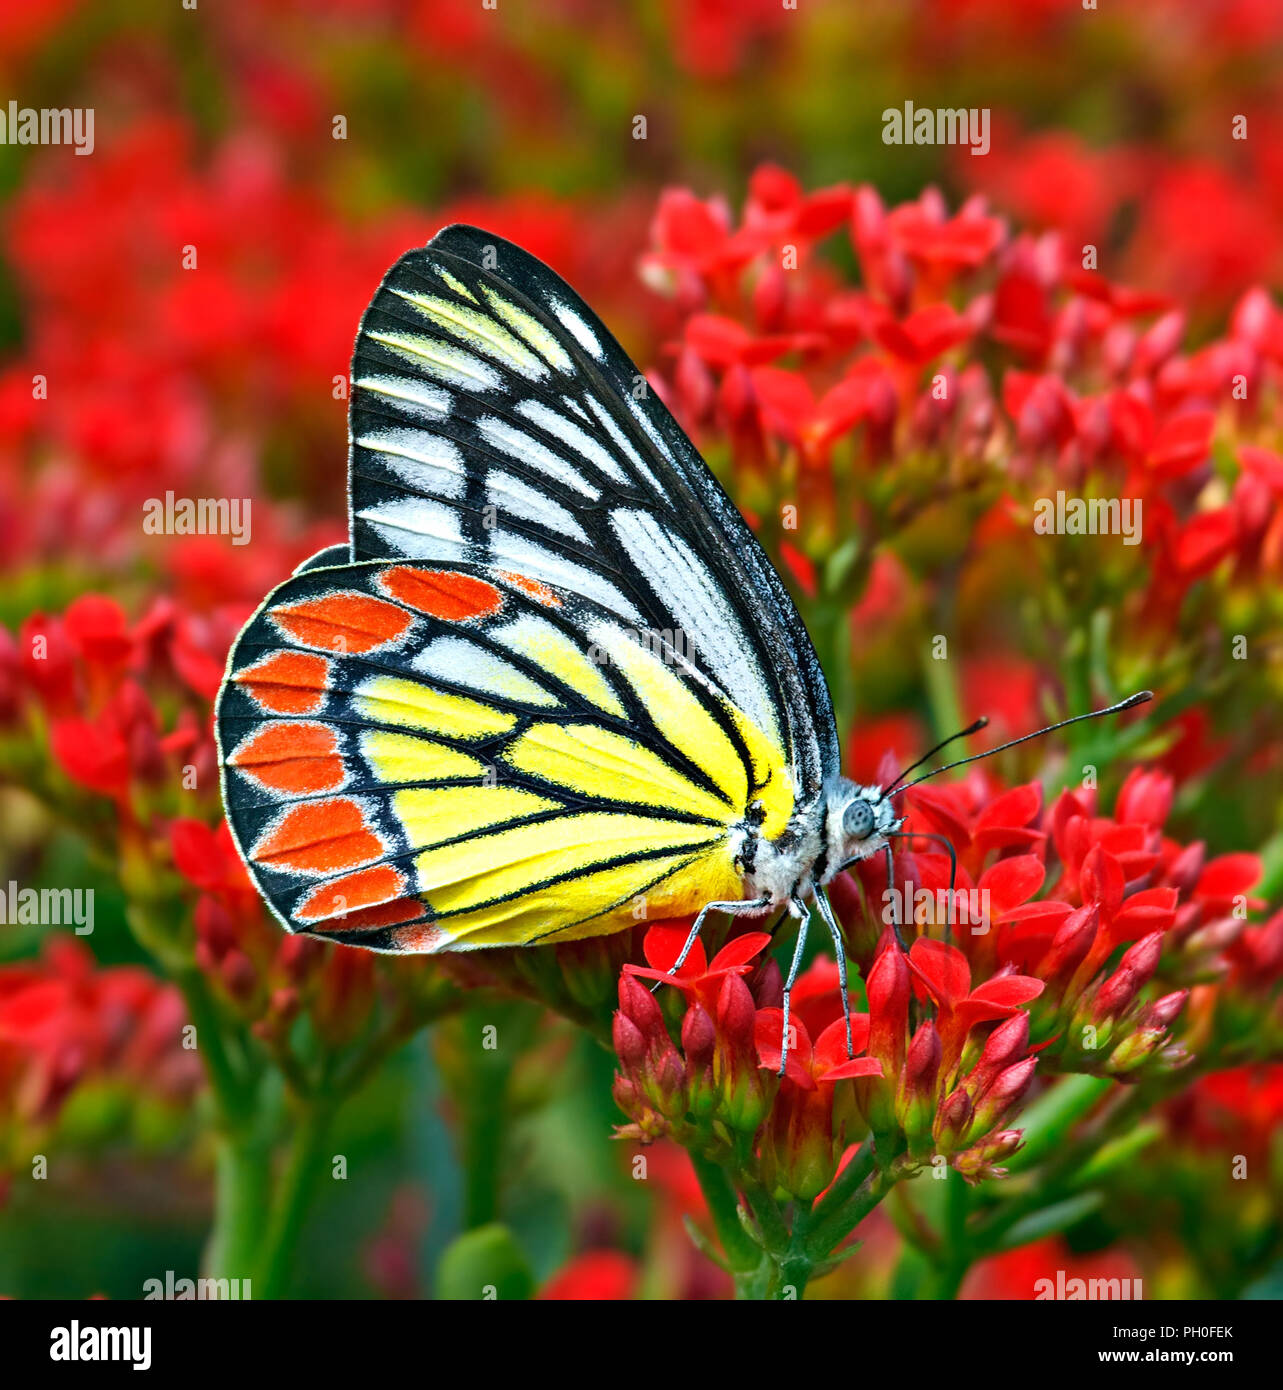 Delias eucharis or common Jezebel butterfly bathing in red flowers. Stock Photo